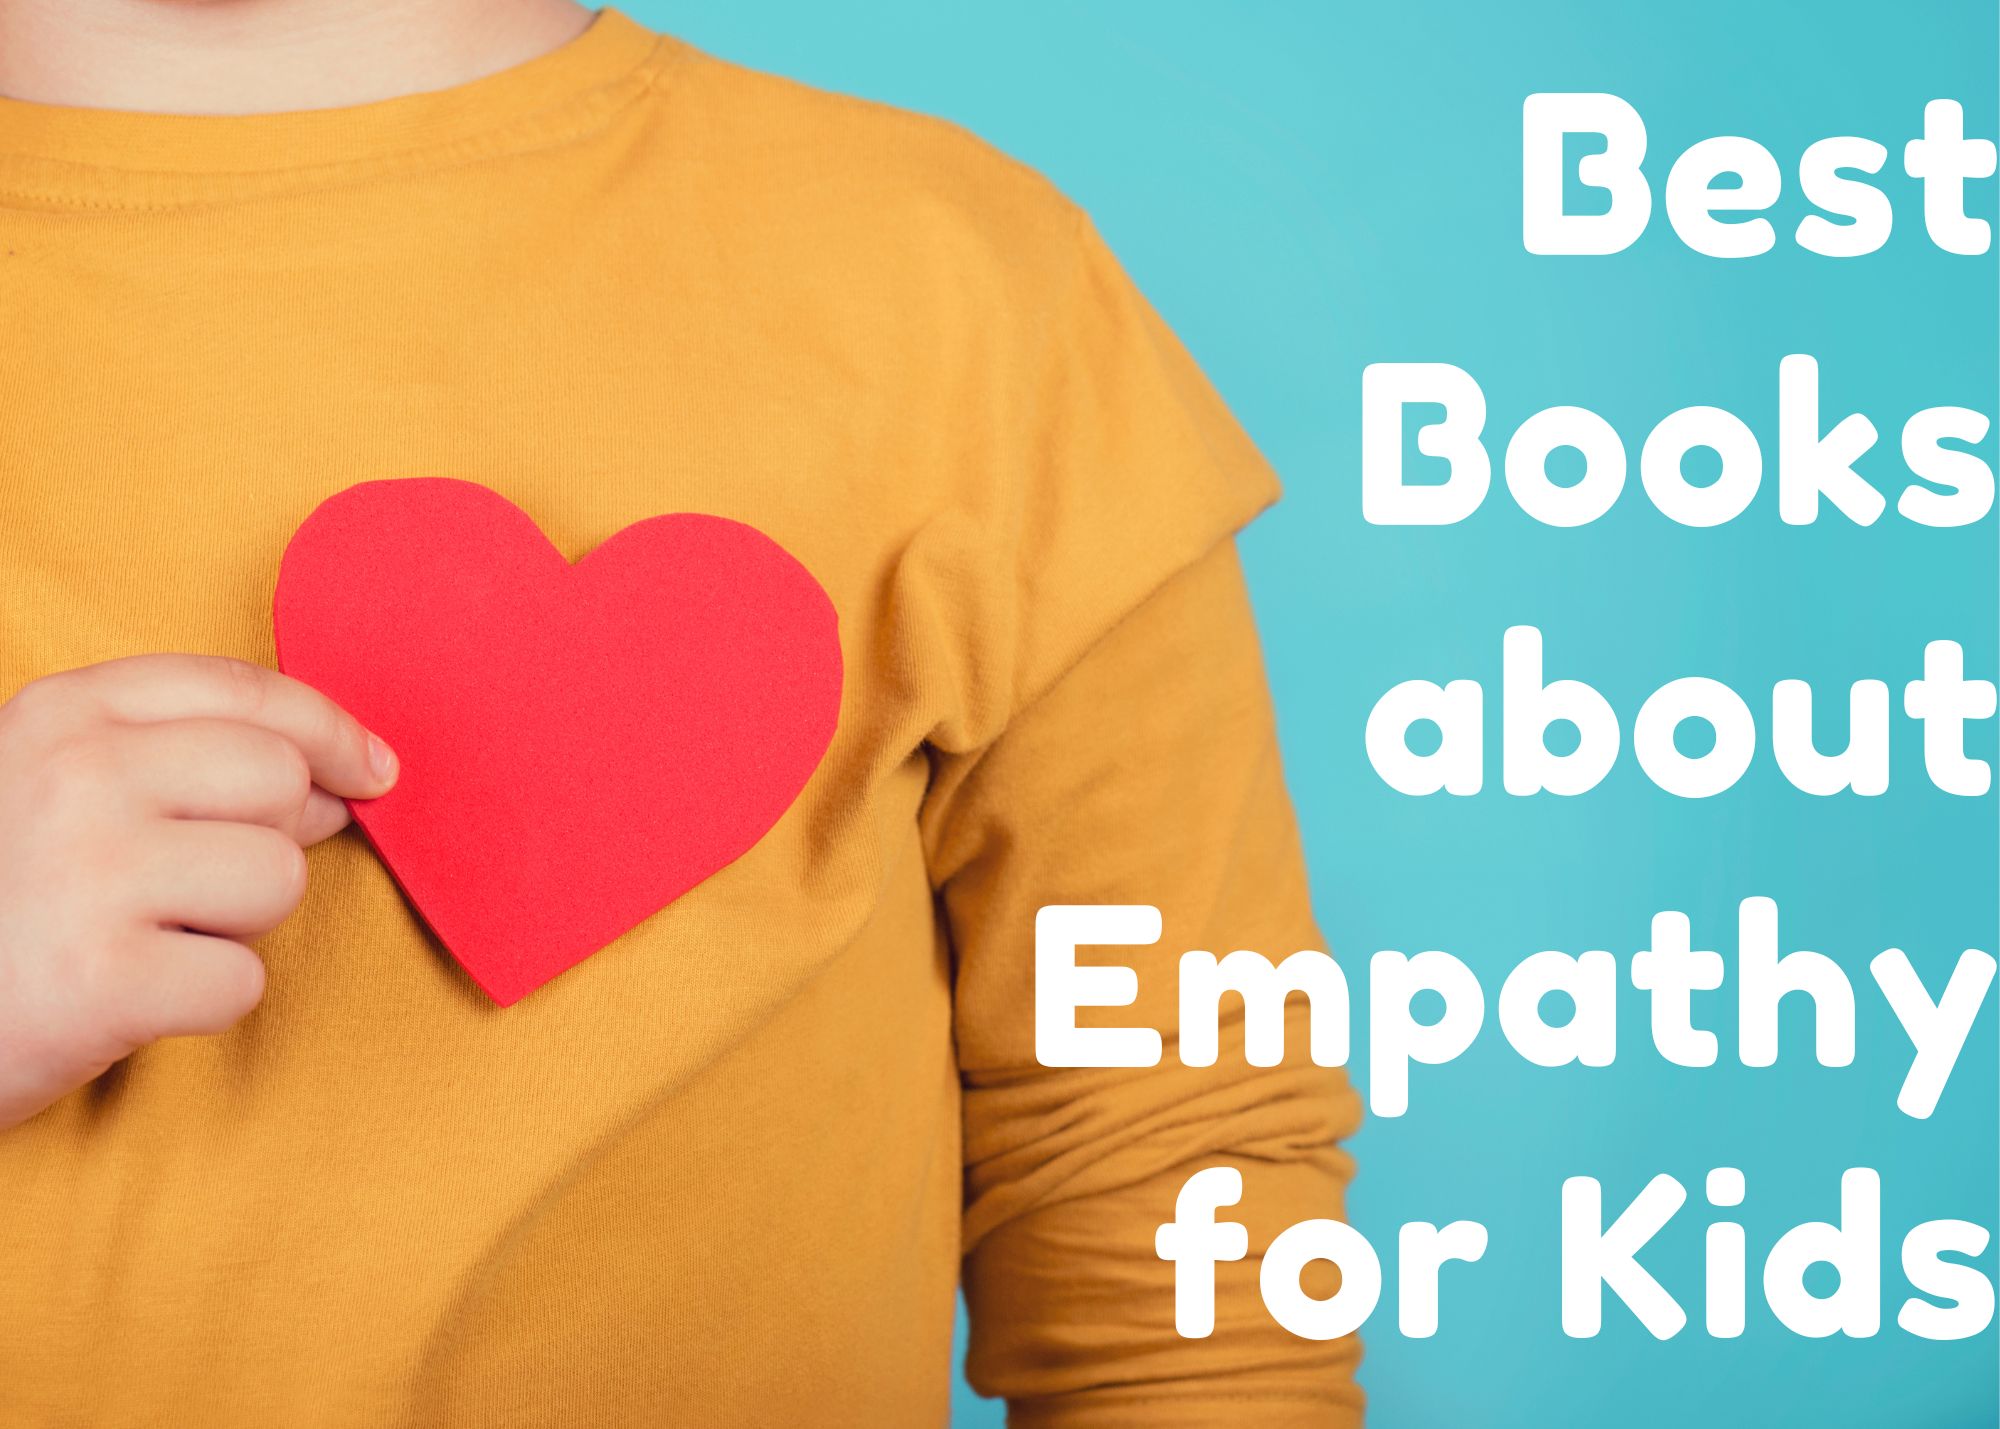 Best Books About Empathy for Kids